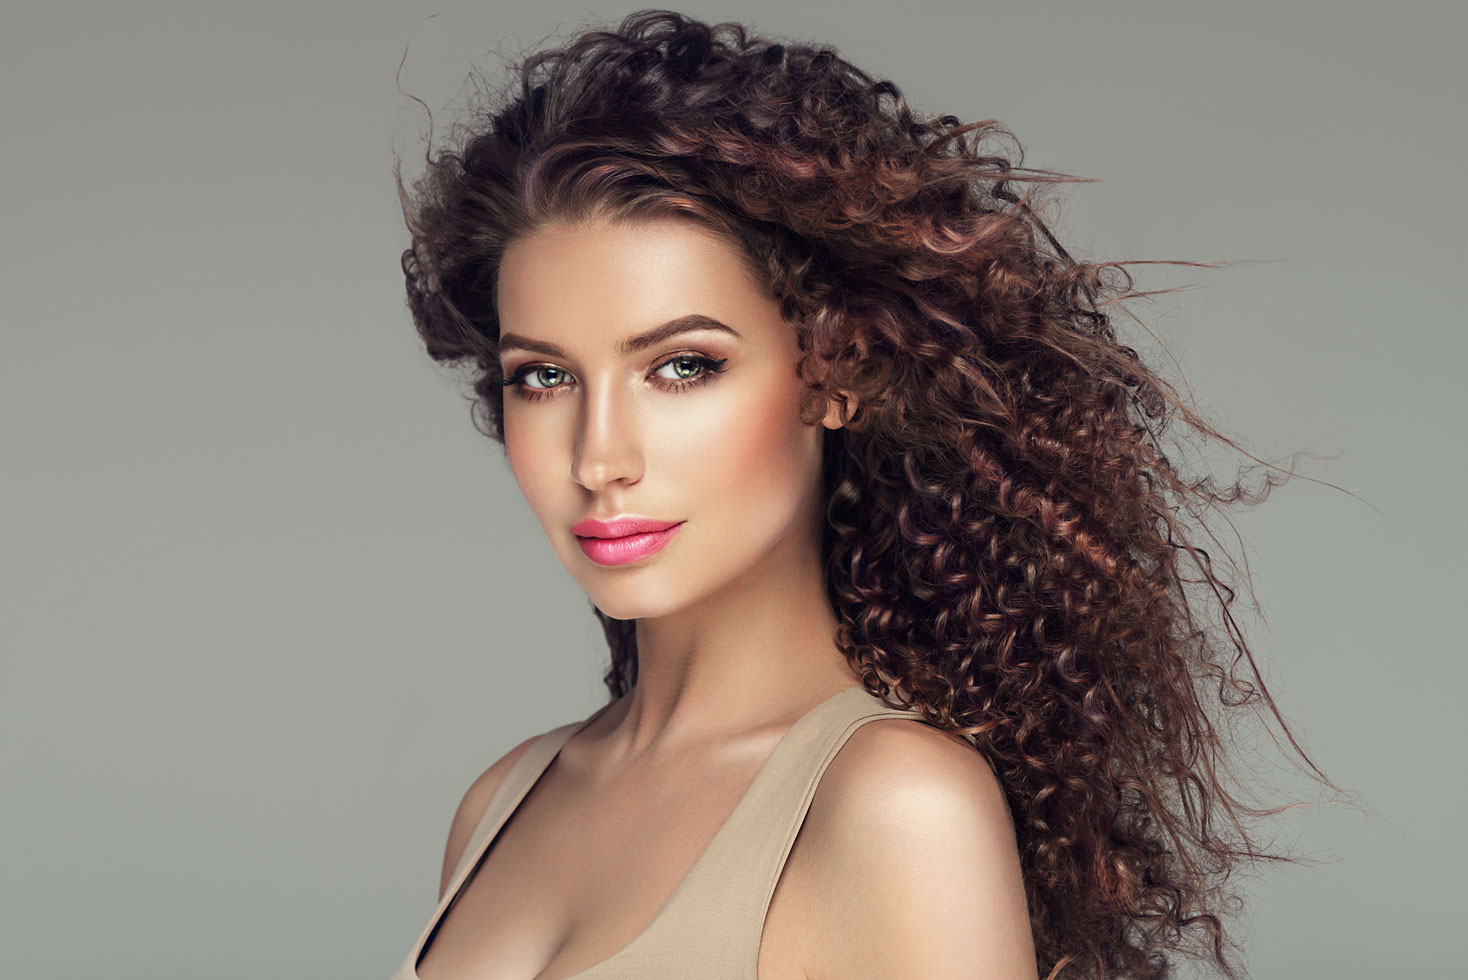 What Does a Keratin Treatment Do to Curly Hair?